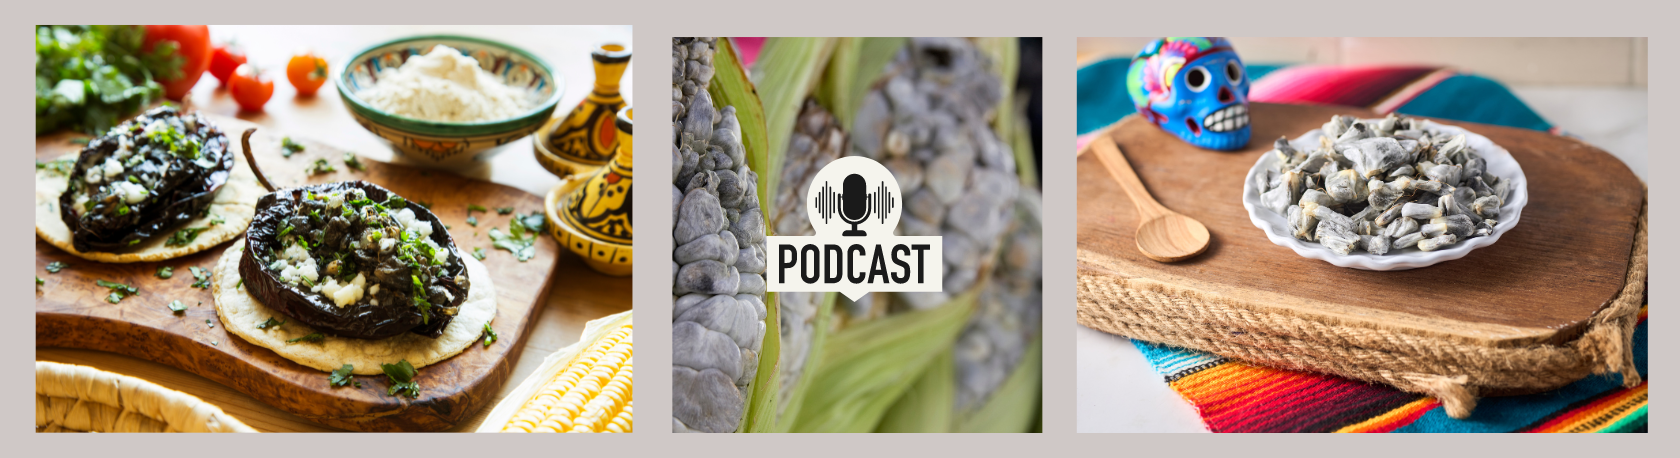 Listen to our Spanish Podcast to learn why the HUITLACOCHE is known as a delicacy from the Gods - Learn Spanish Podcast - Study Spanish - Speak Spanish - Spanish Audios - Spanish on the Go - Easy Español